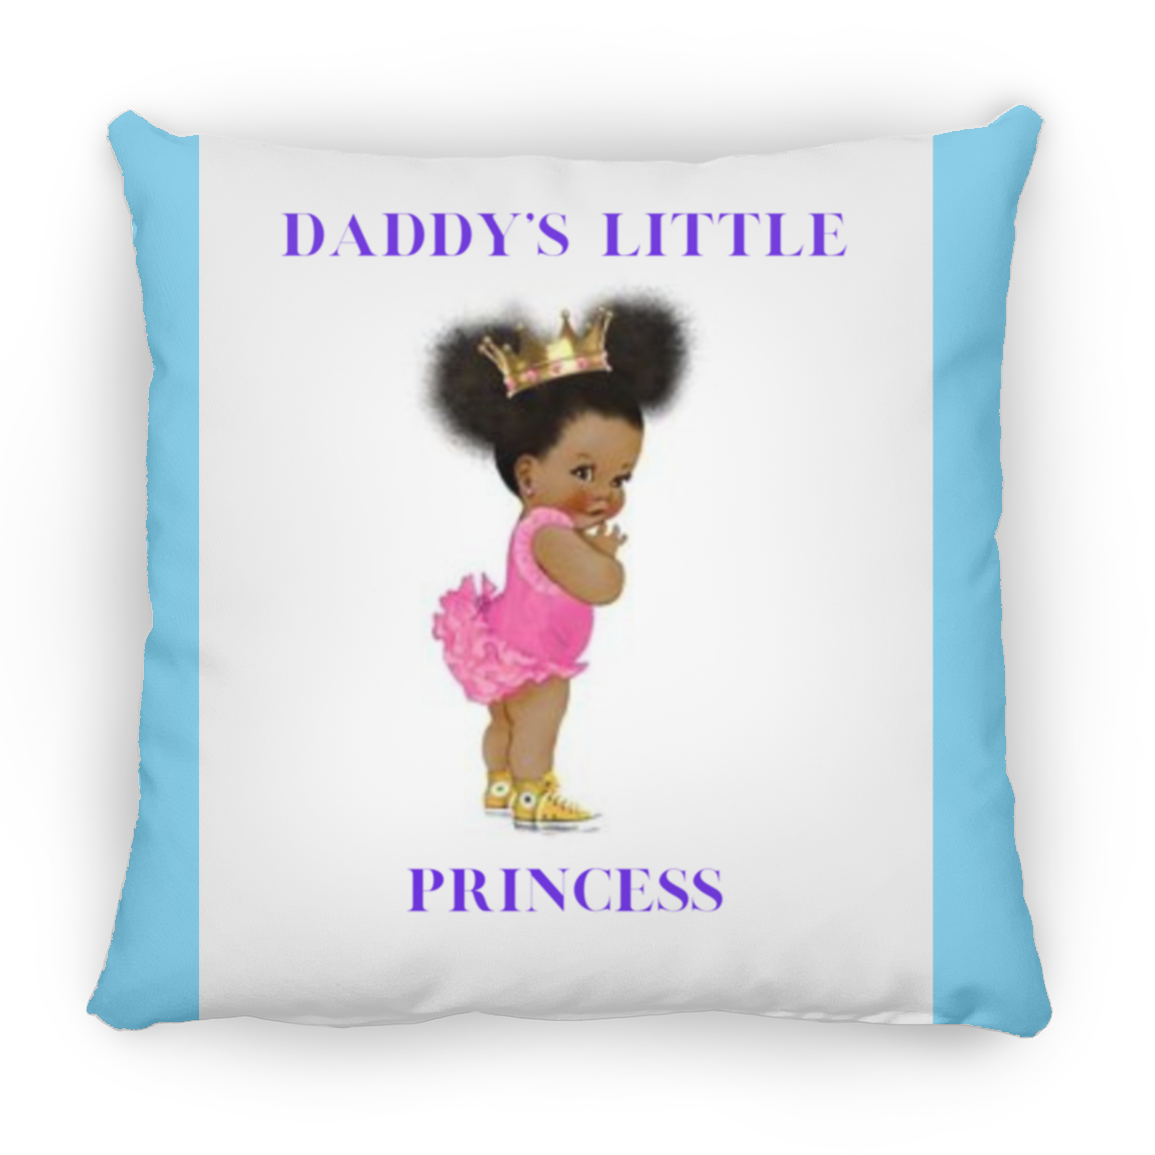 Daddy's Little Girl Large Square Pillow